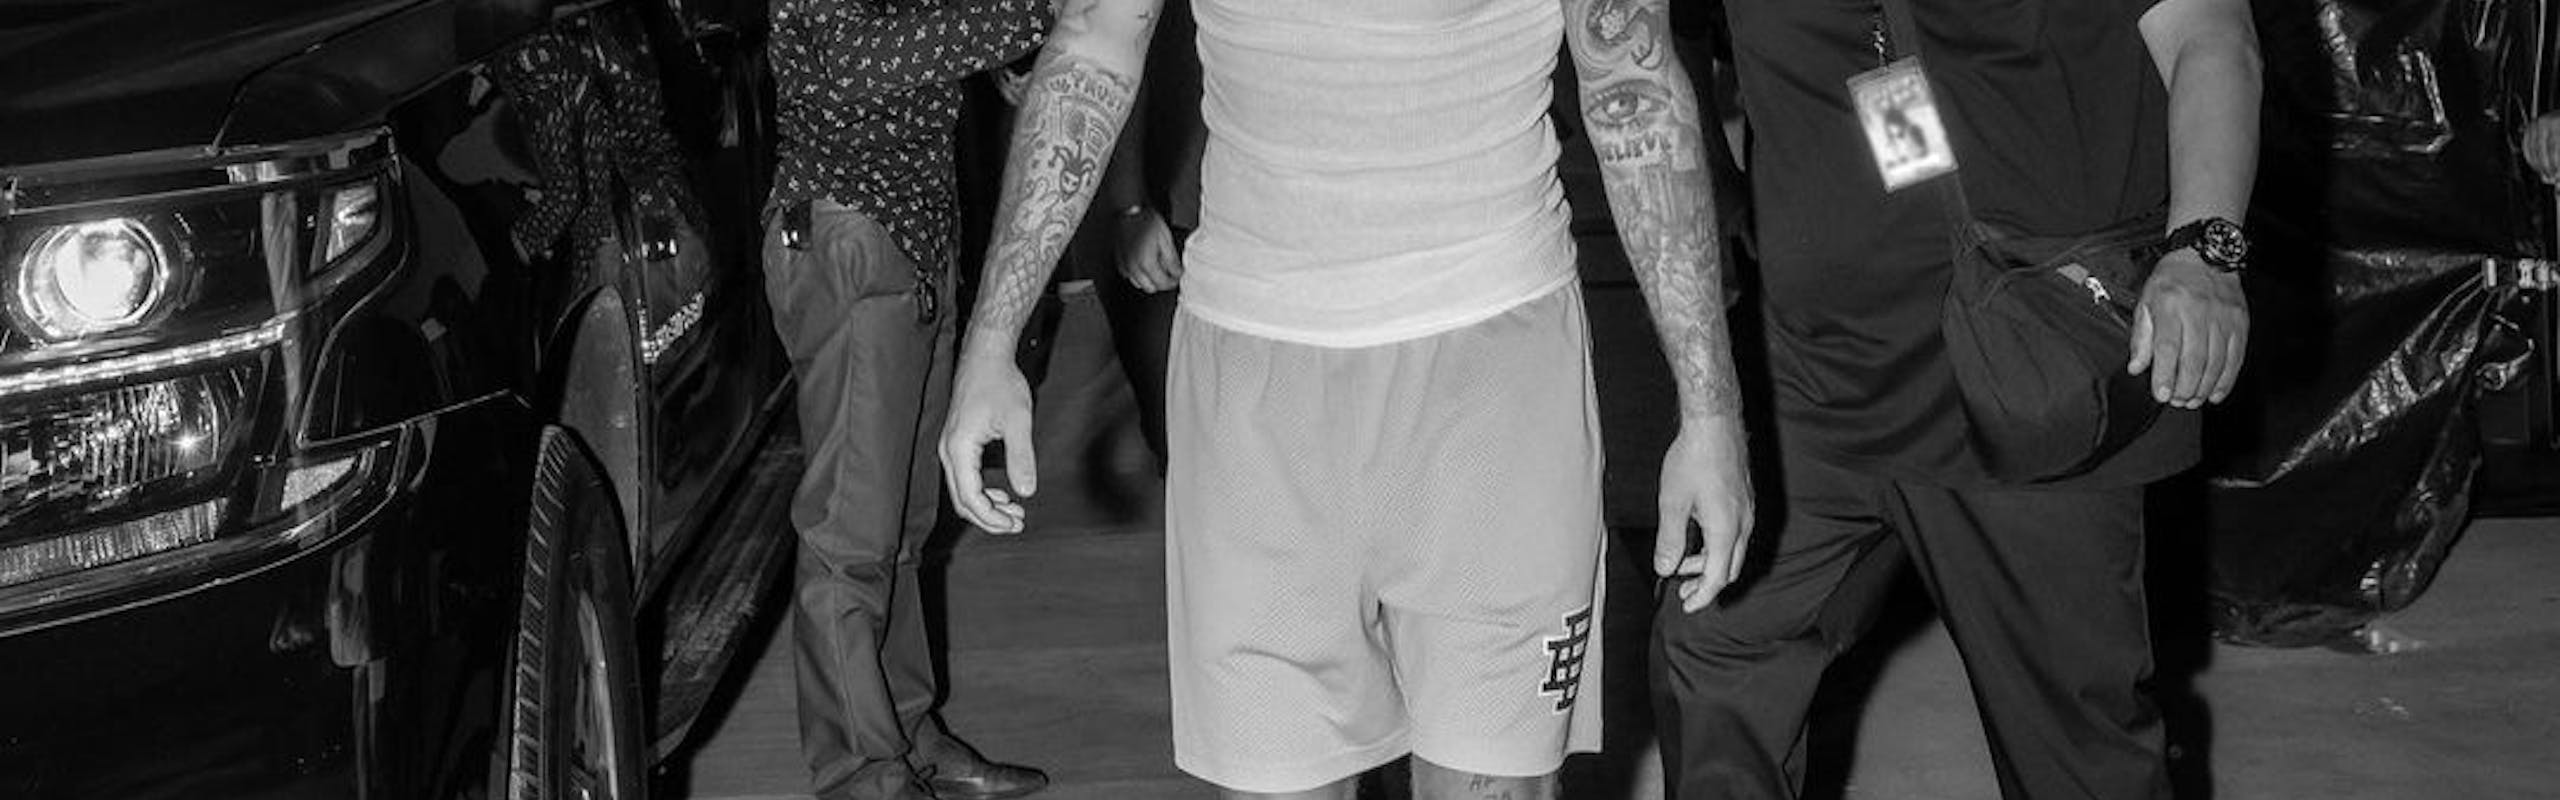 In a black and white photo, Justin Bieber sports a white tank and shorts.